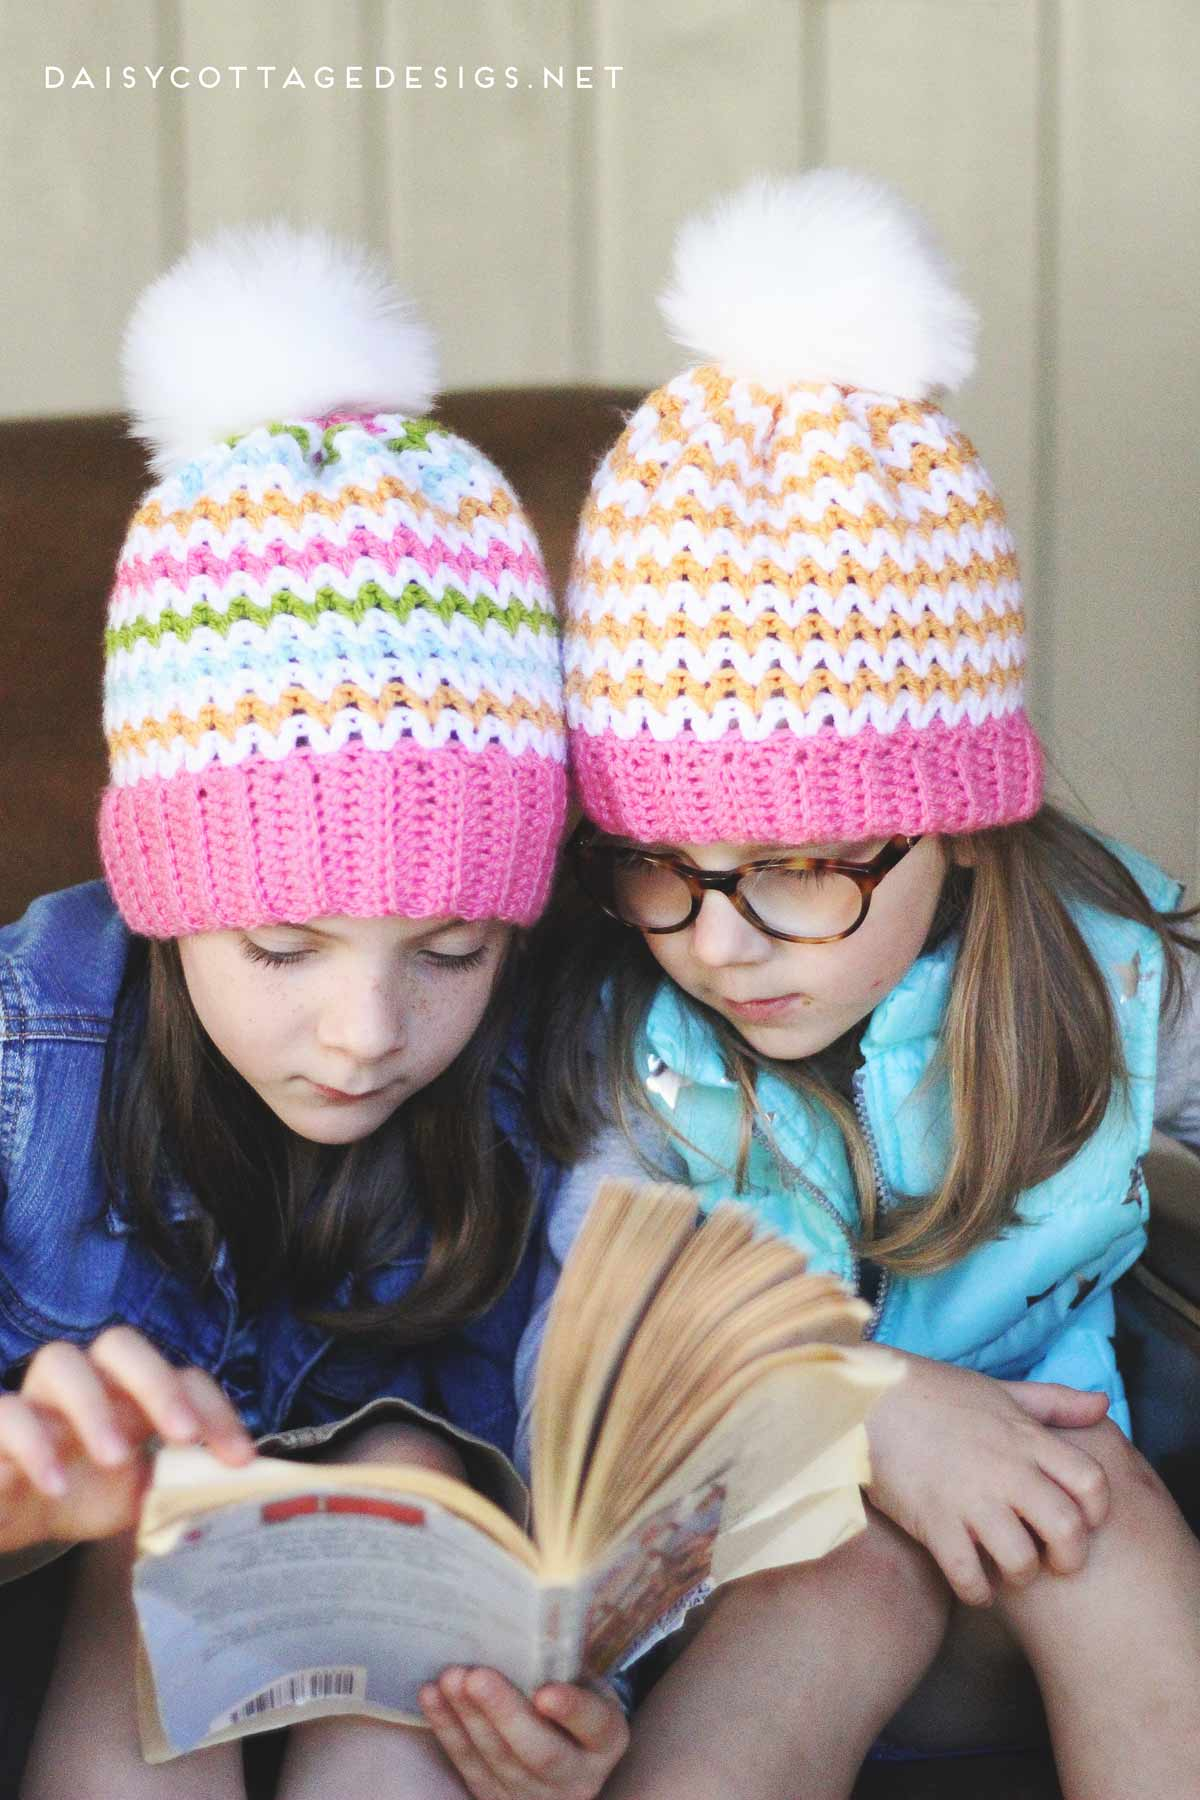 Crochet Slouchy Hat With Brim Pattern Slouchy Beanie Crochet Pattern Daisy Cottage Designs